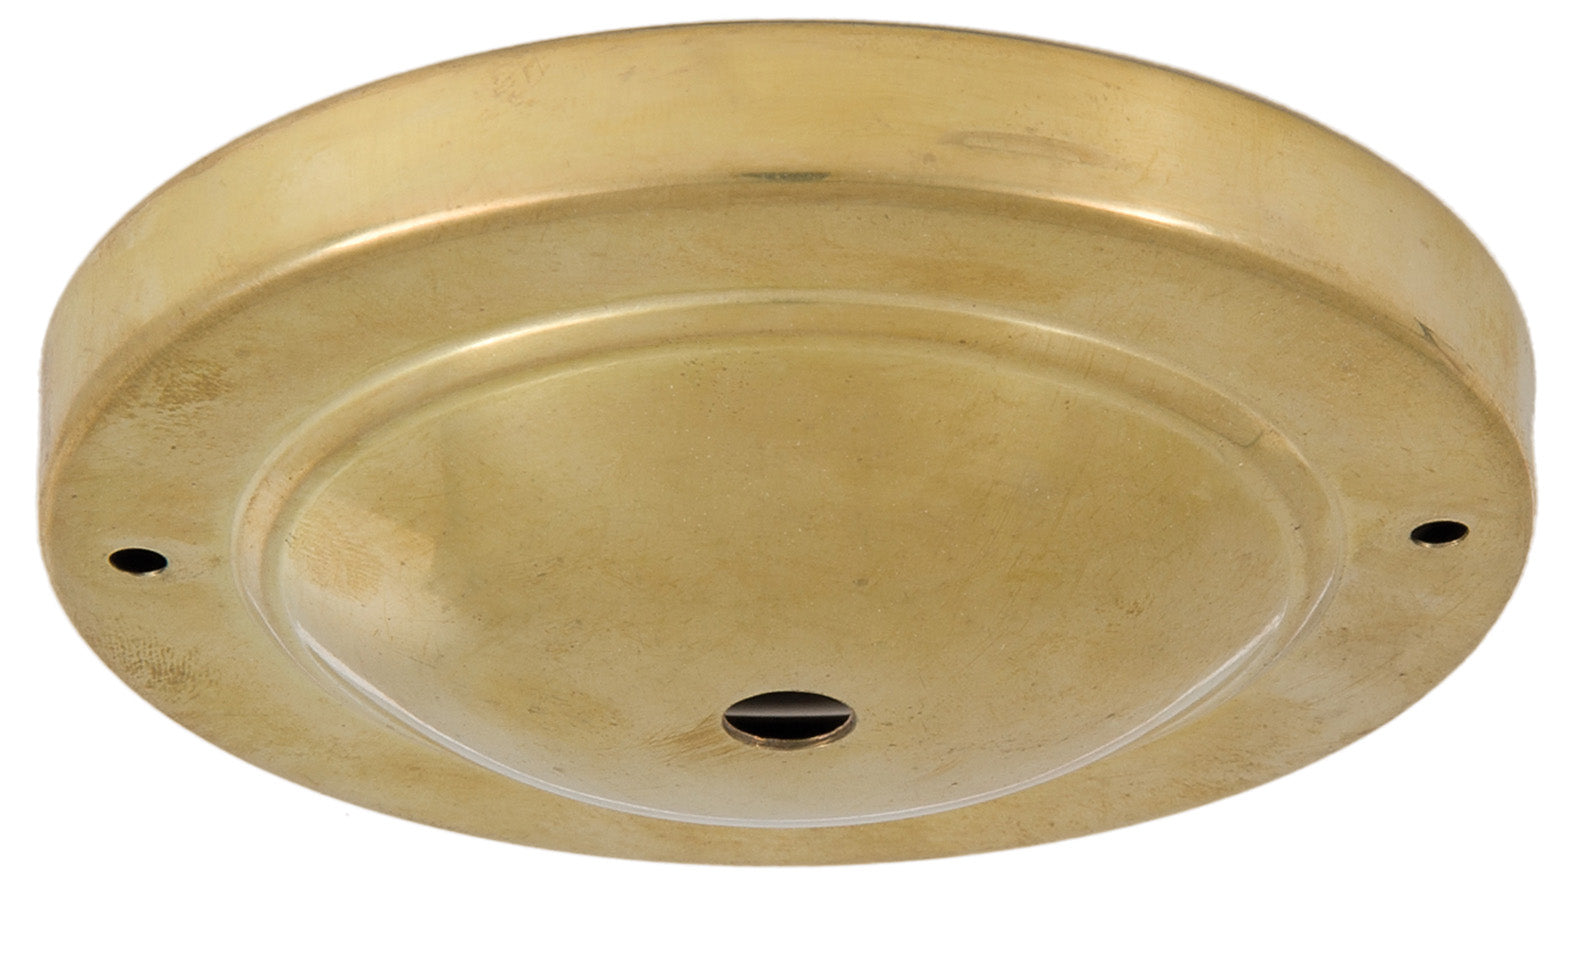 Shallow Dome Shape Unfinished Brass Canopy & hardware kit with matching finish